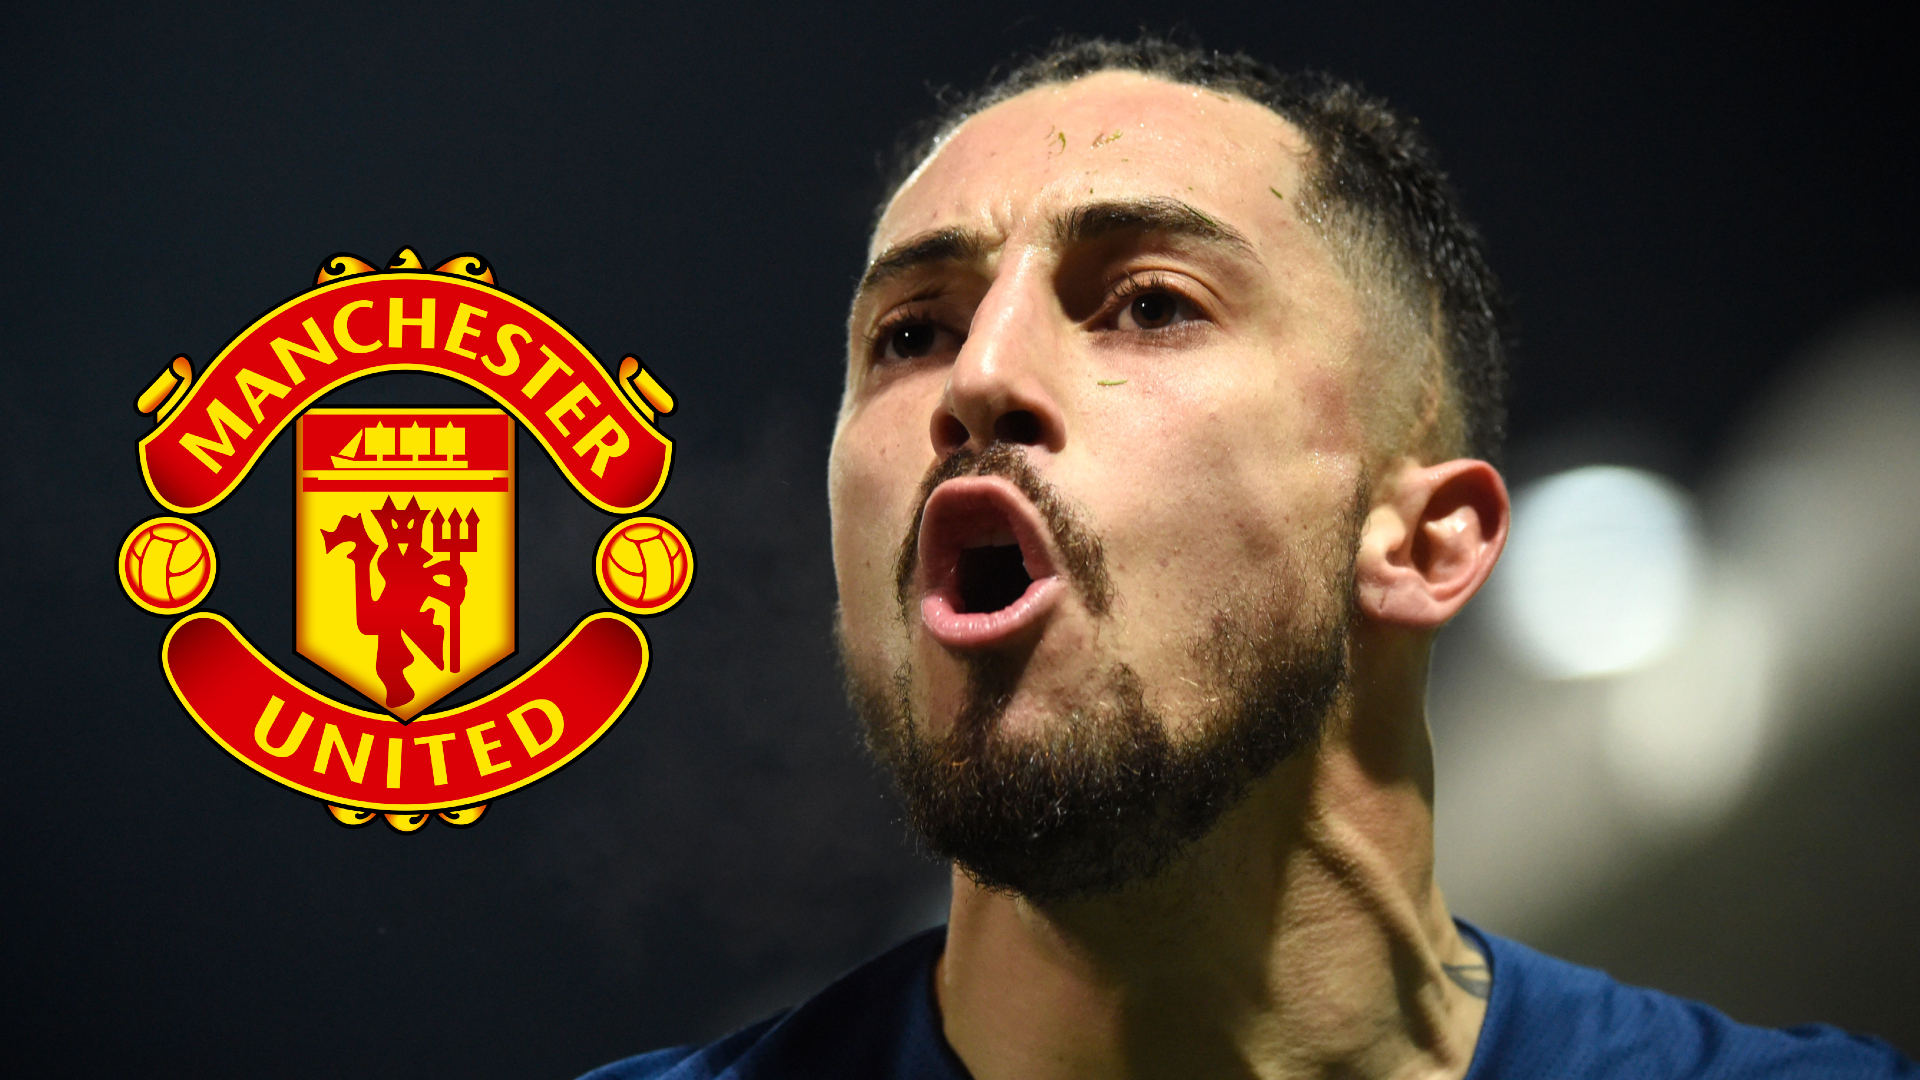 Shaw welcomes extra competition for places at Man Utd after Telles' arrival at Old Trafford